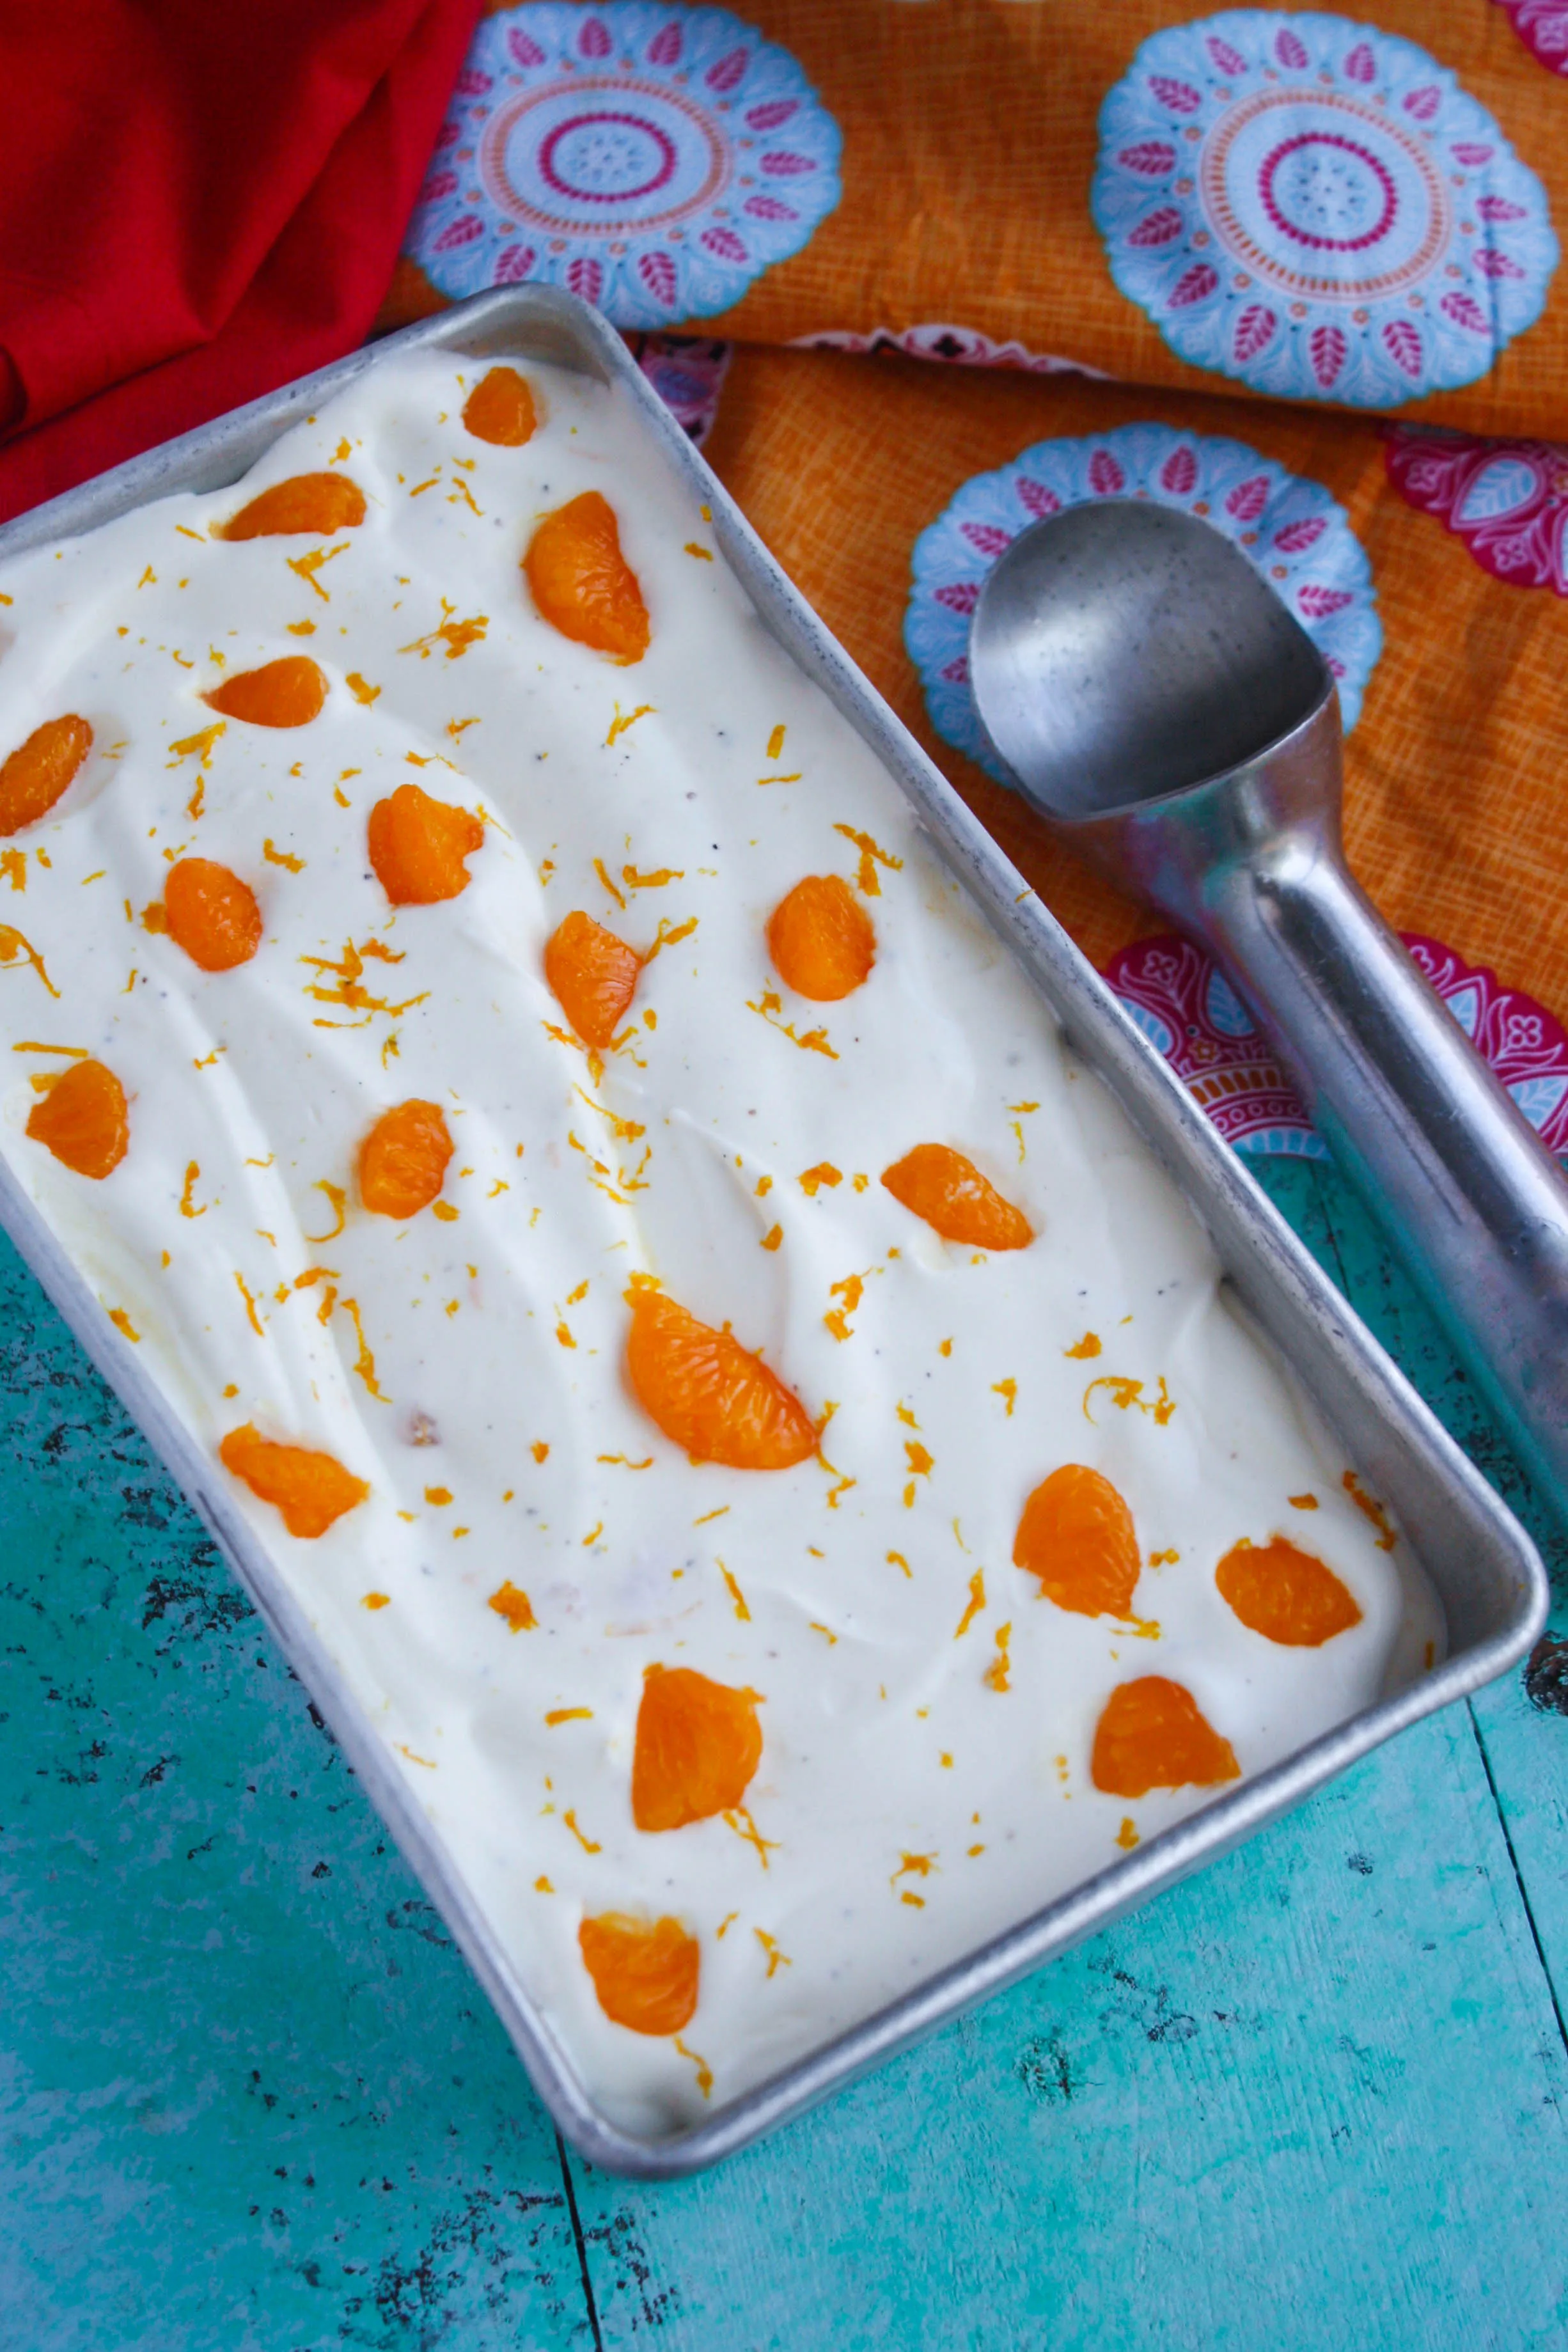 No Churn Orange-Cardamom Ice Cream is a wonderful dessert. You'll love the flavors in this easy-to-make dessert.